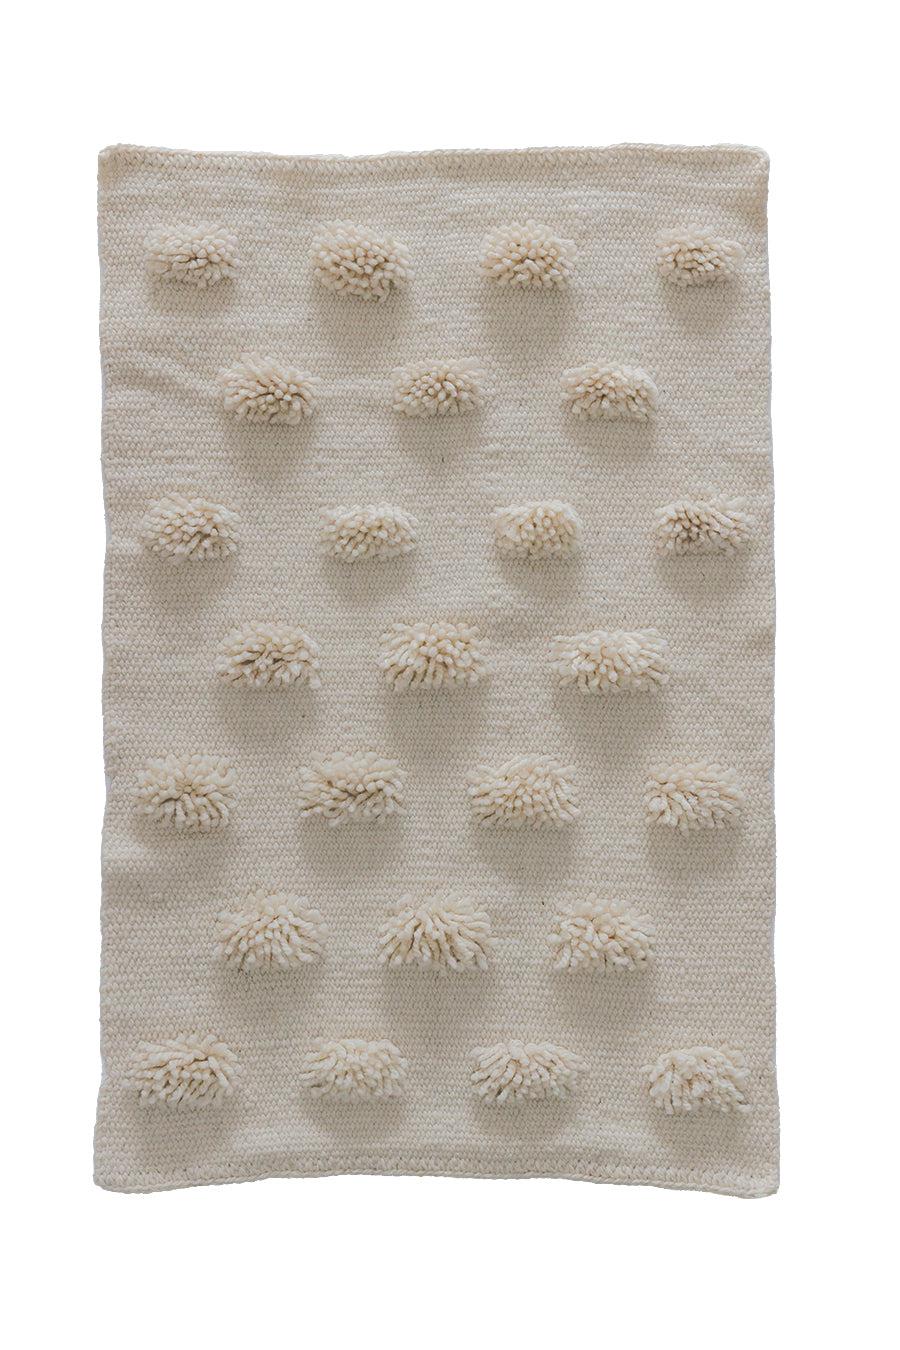 PLENA RUG | MINI #4 NATURAL POMPOM-The Andes Project